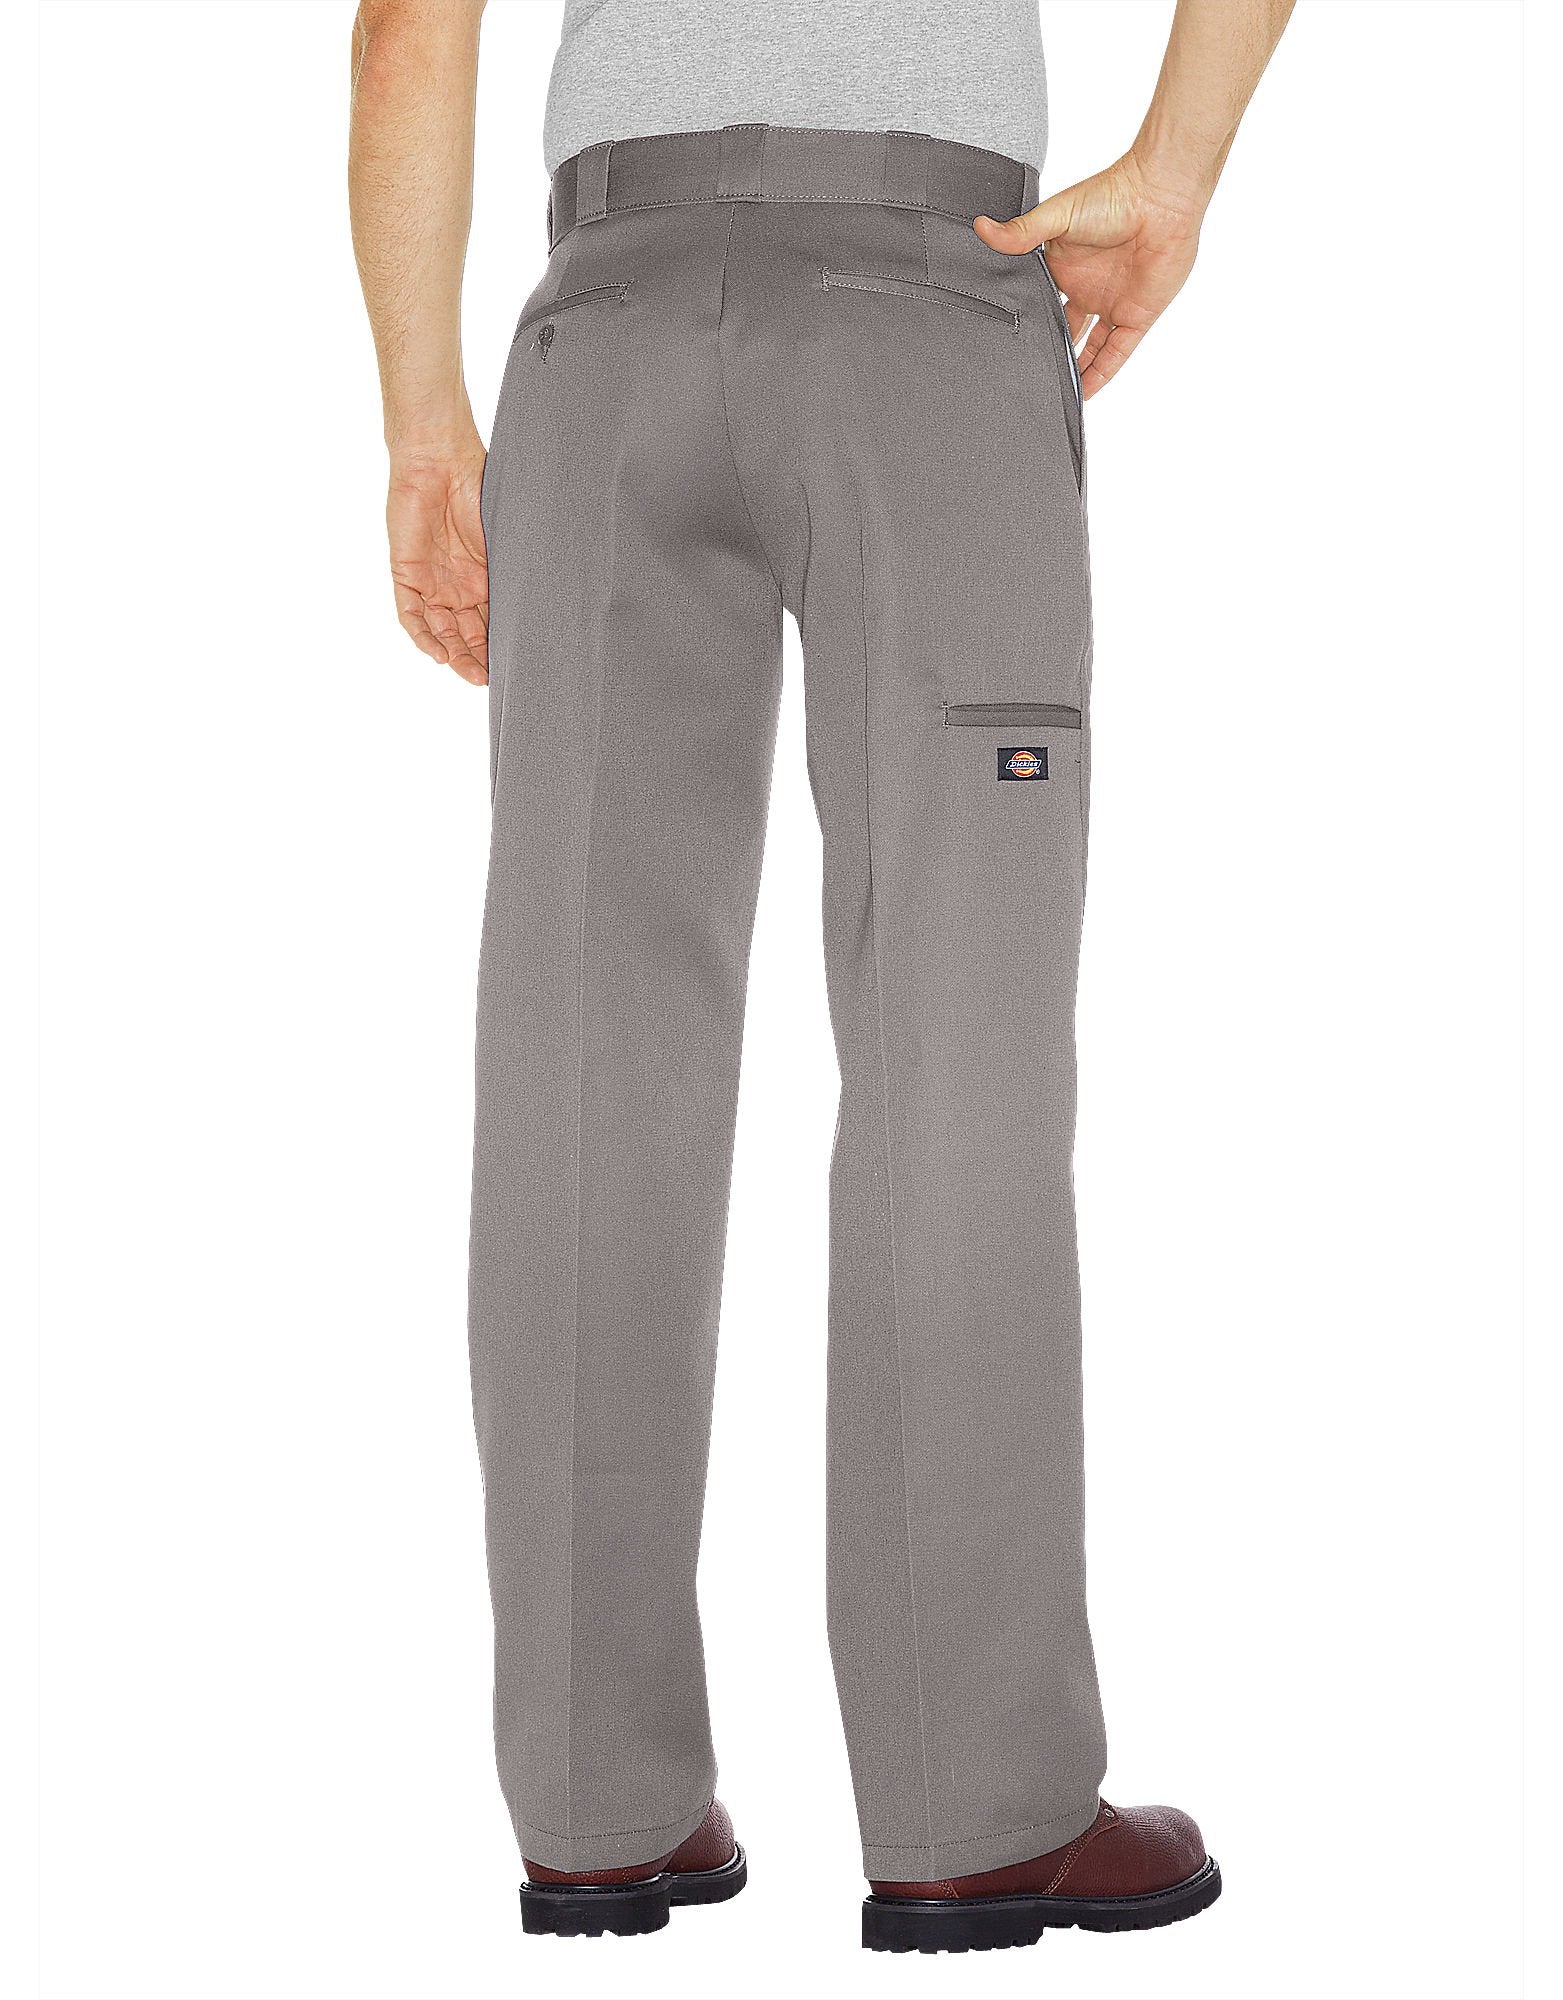 Dickies Double Knee Work Pants Silver Craze Fashion